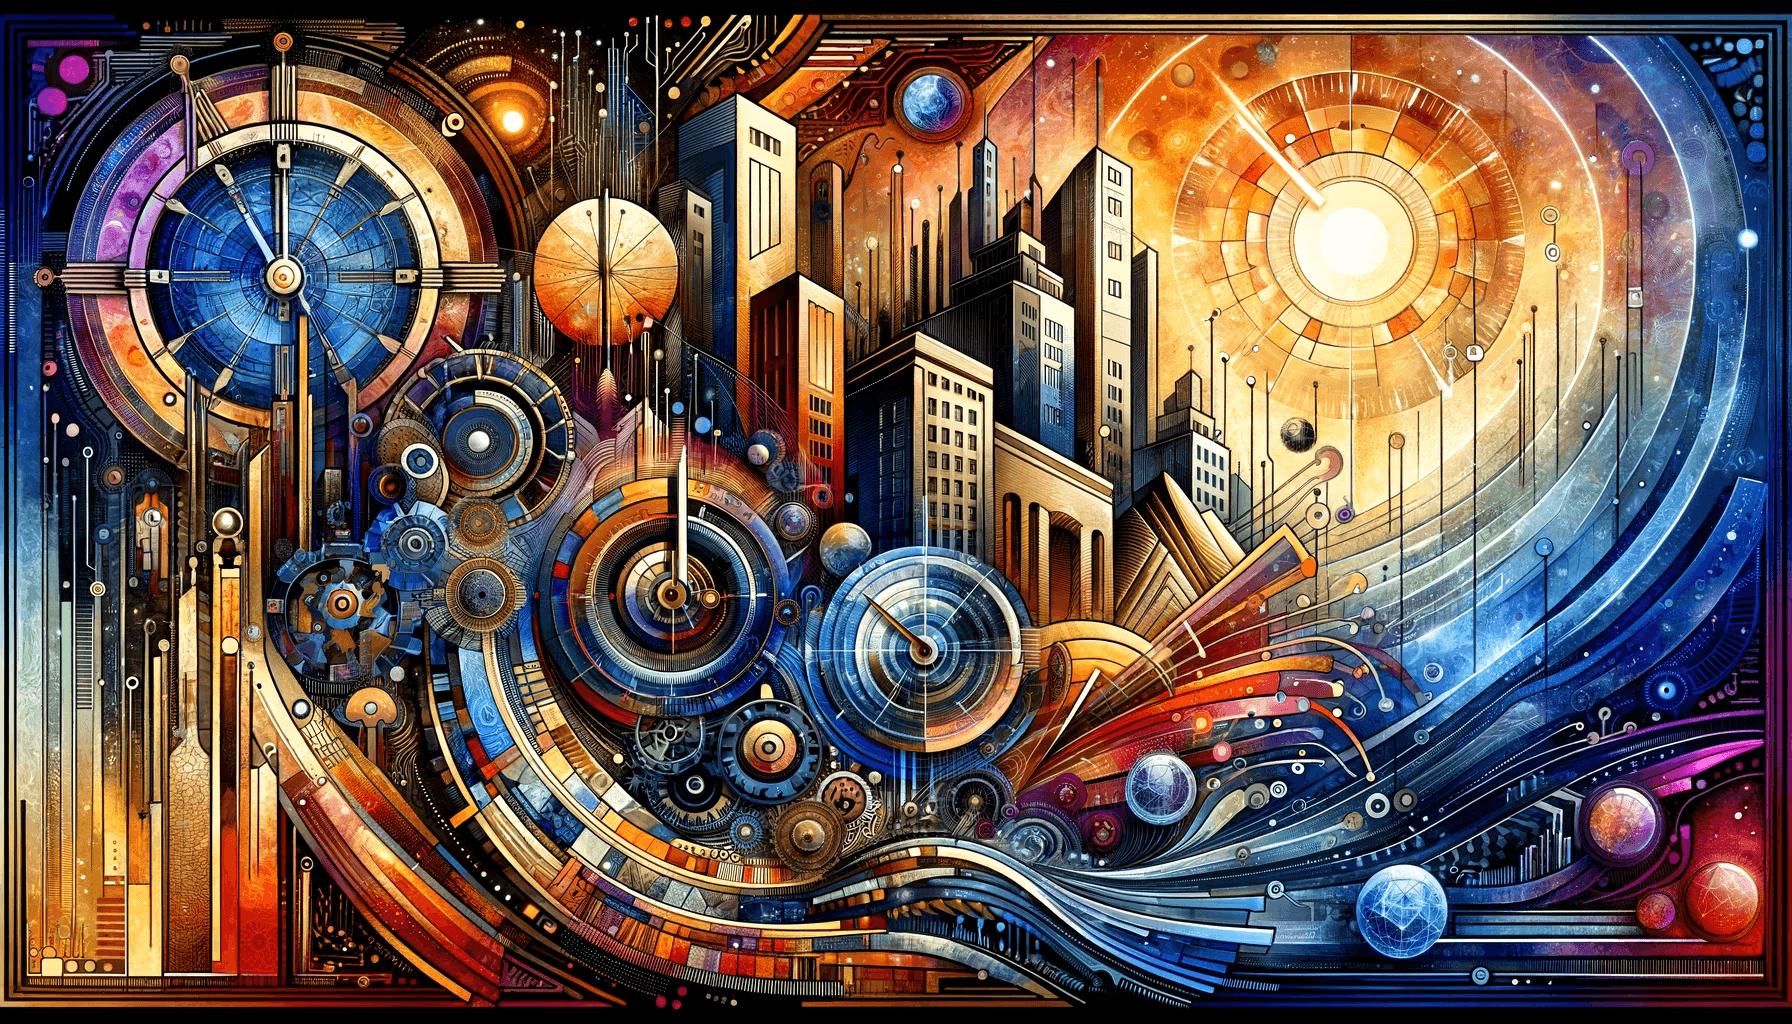  Abstract artwork that embodies the concept of a company's historical progression. The visual incorporates a rich tapestry of temporal and architectural symbolism, depicting an evolution of time-keeping devices from sundials to digital clocks and a progression of business structures from tepees to modern skyscrapers.